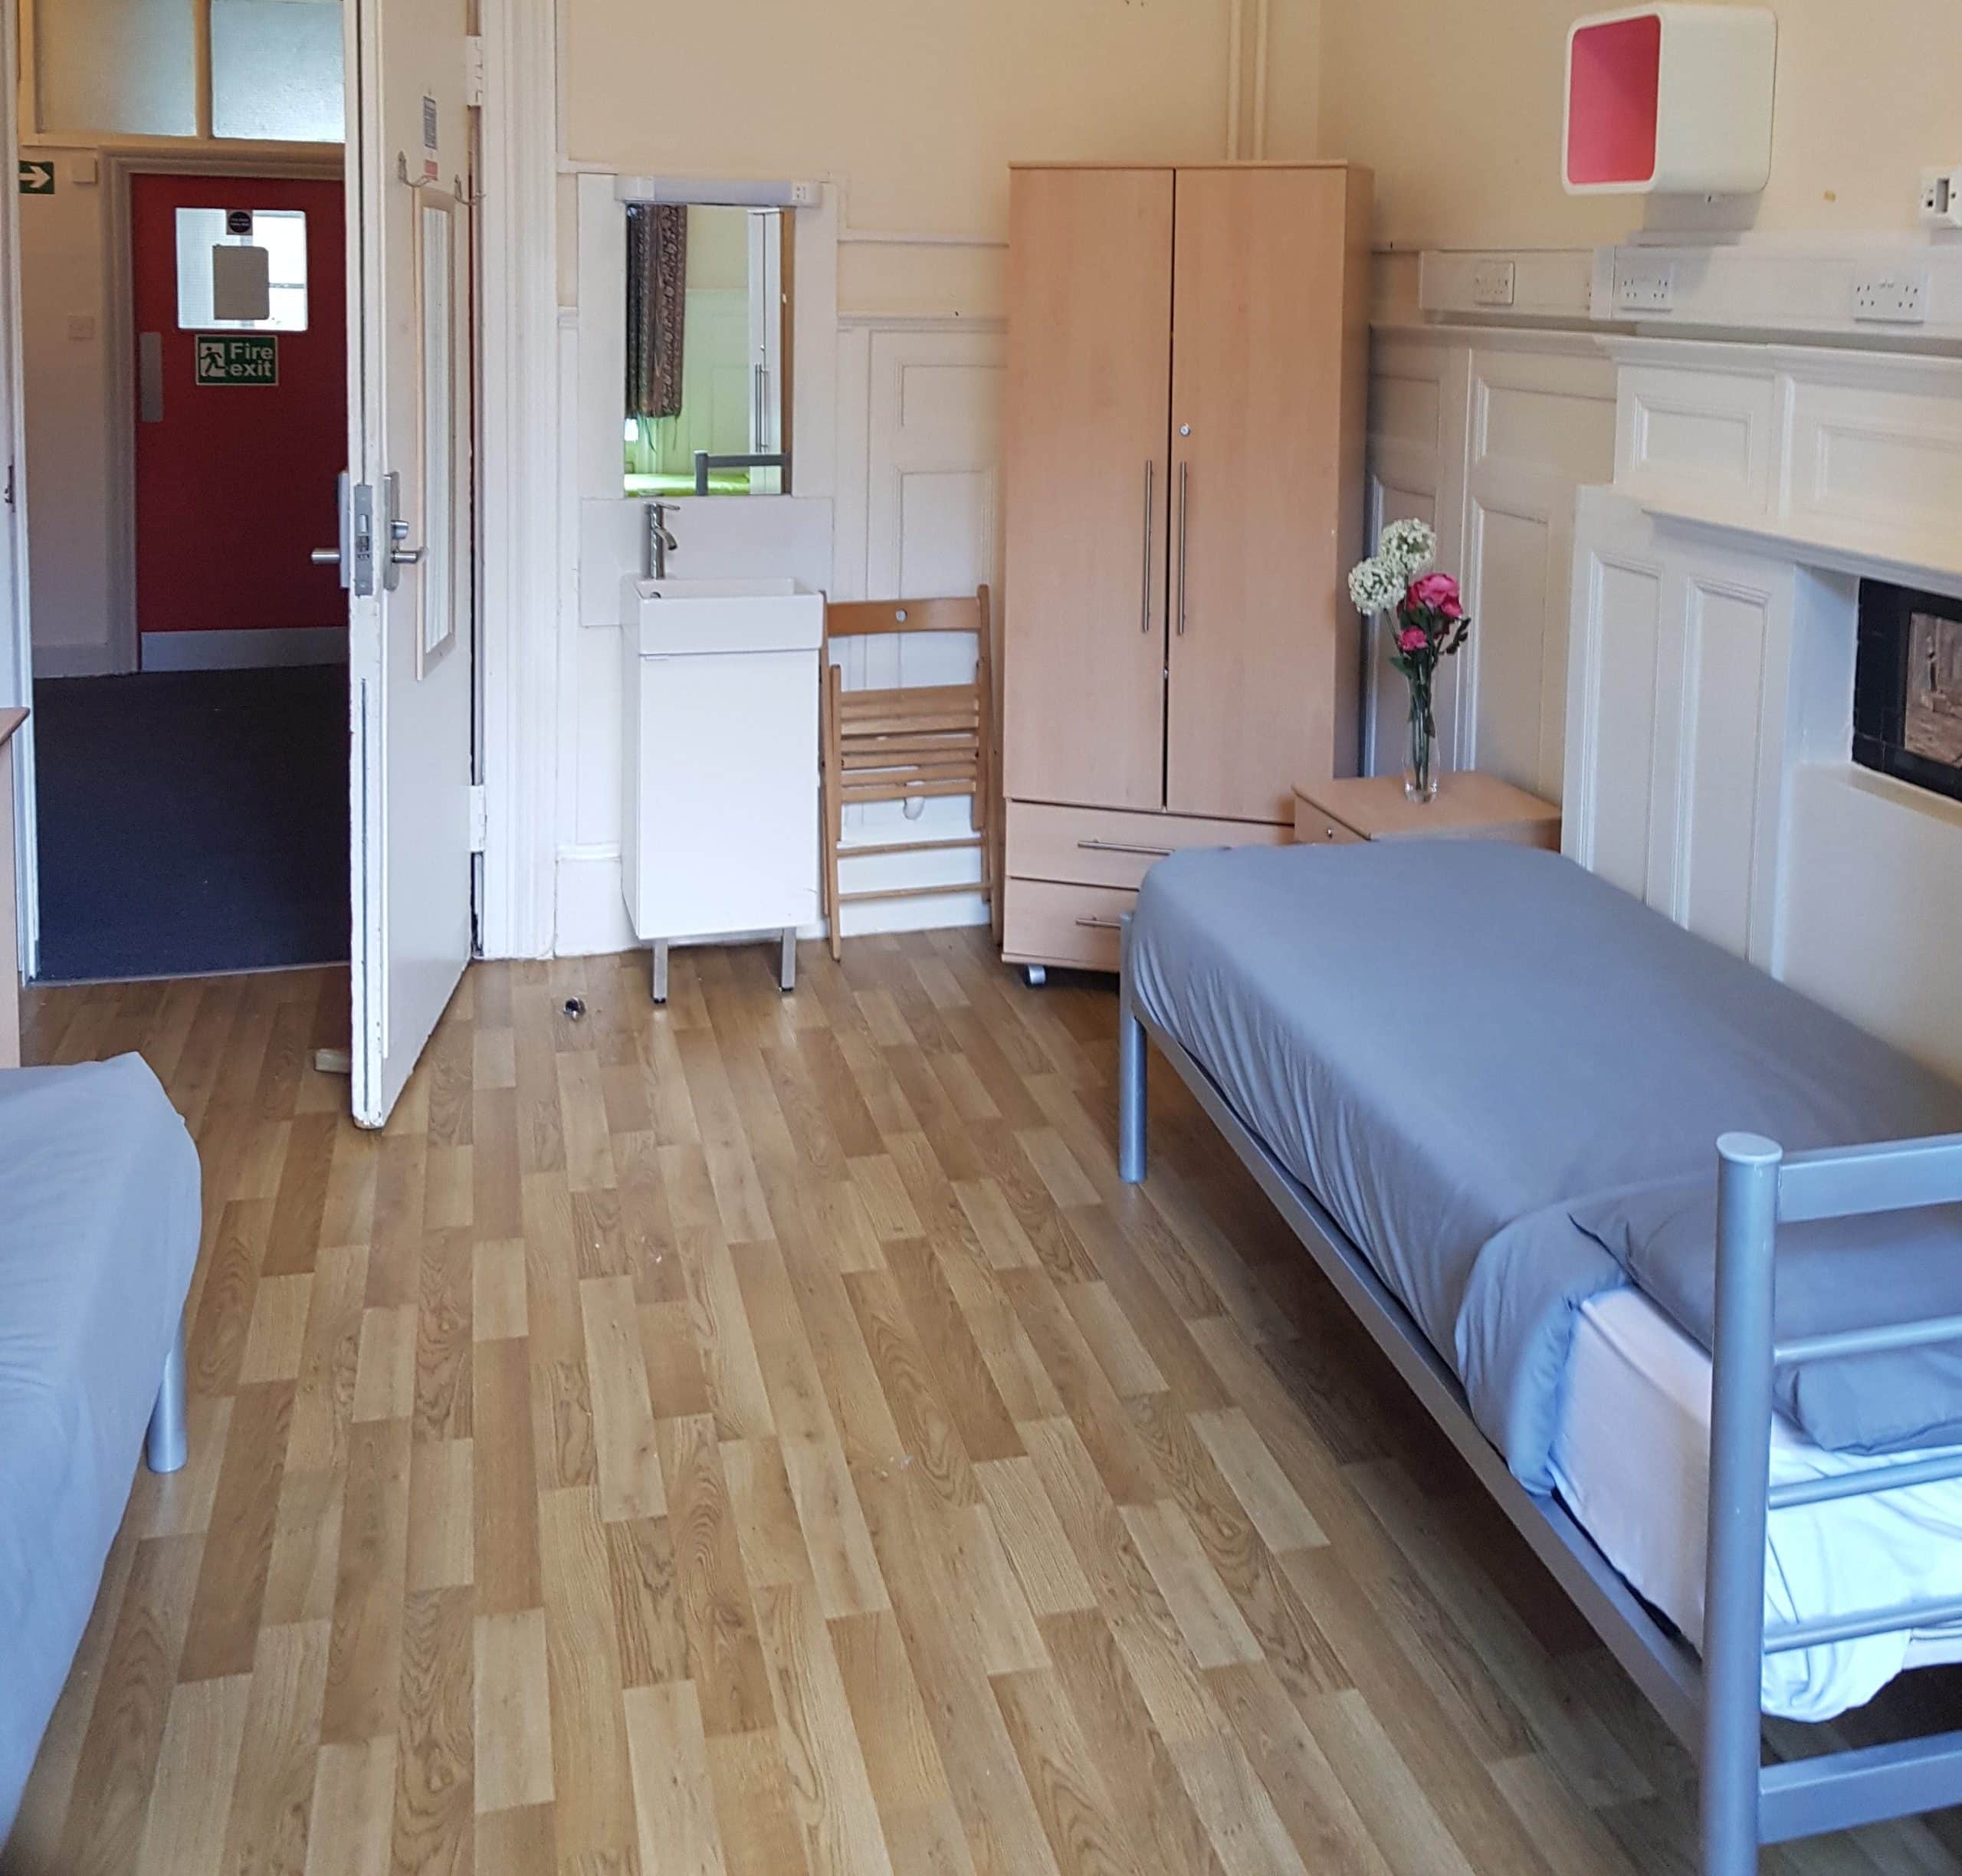 Cheapest Student Accommodation In London